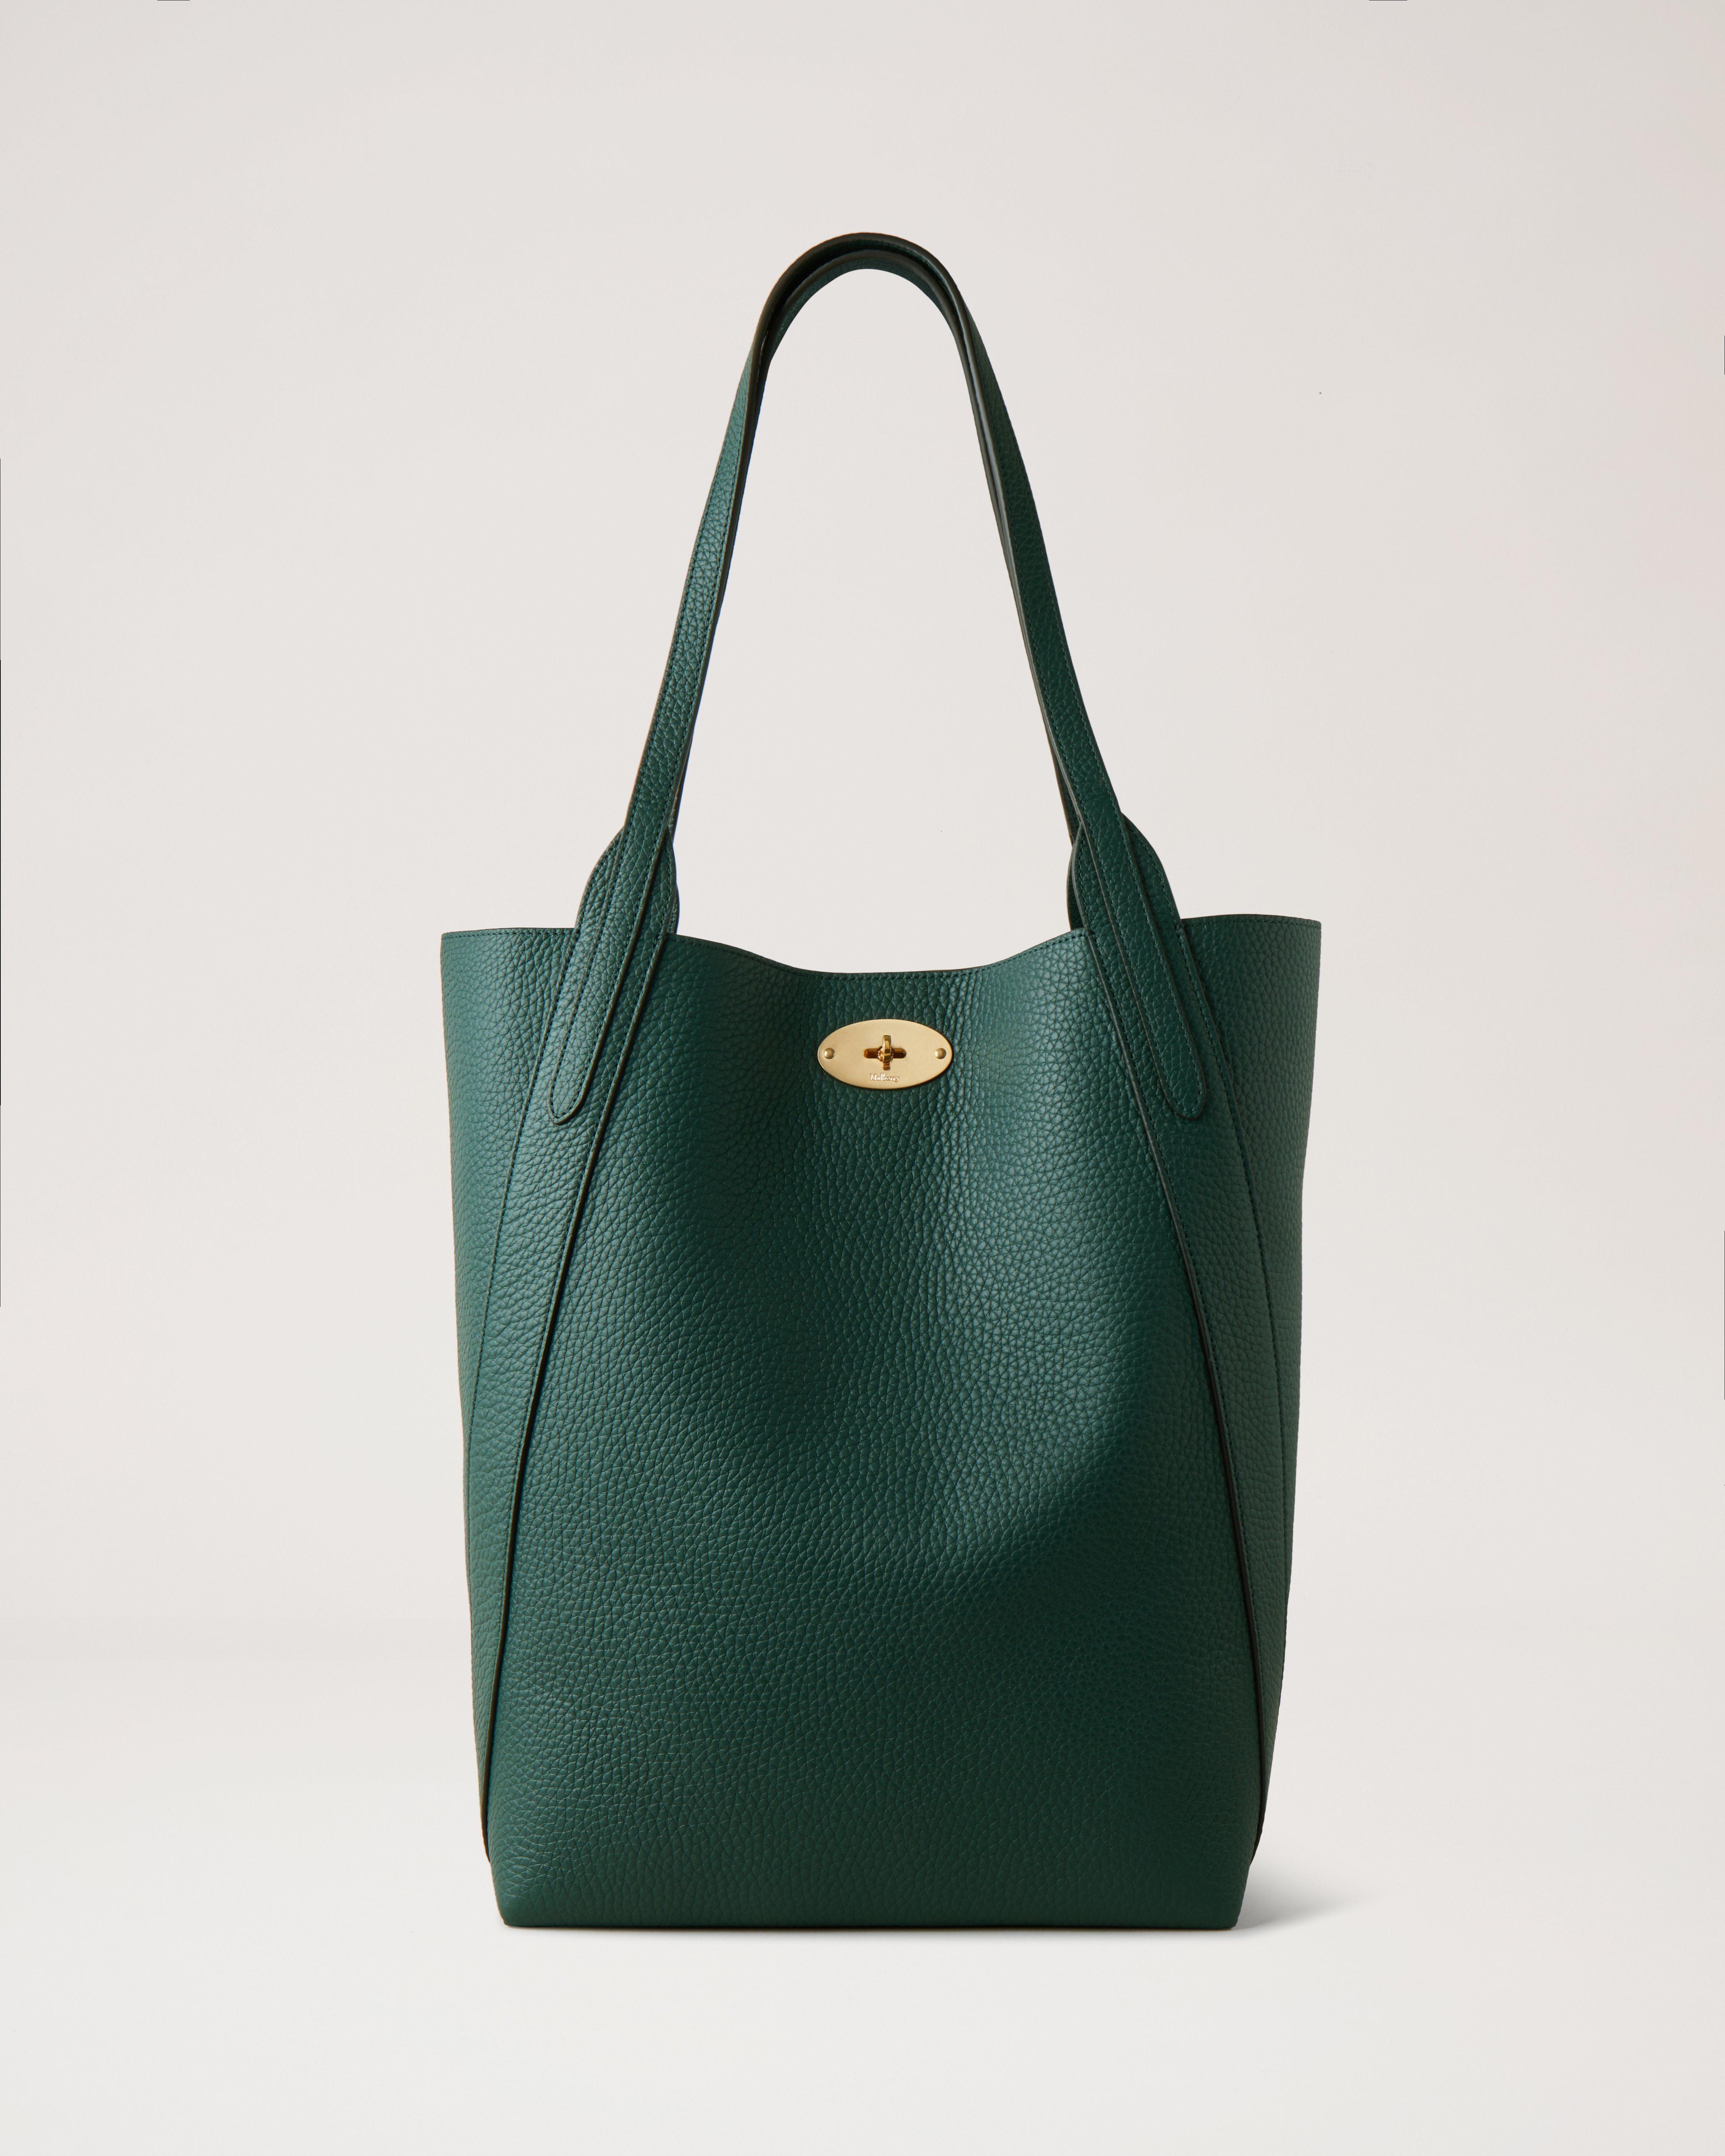 Mulberry north south Bayswater tote in Mulberry Green